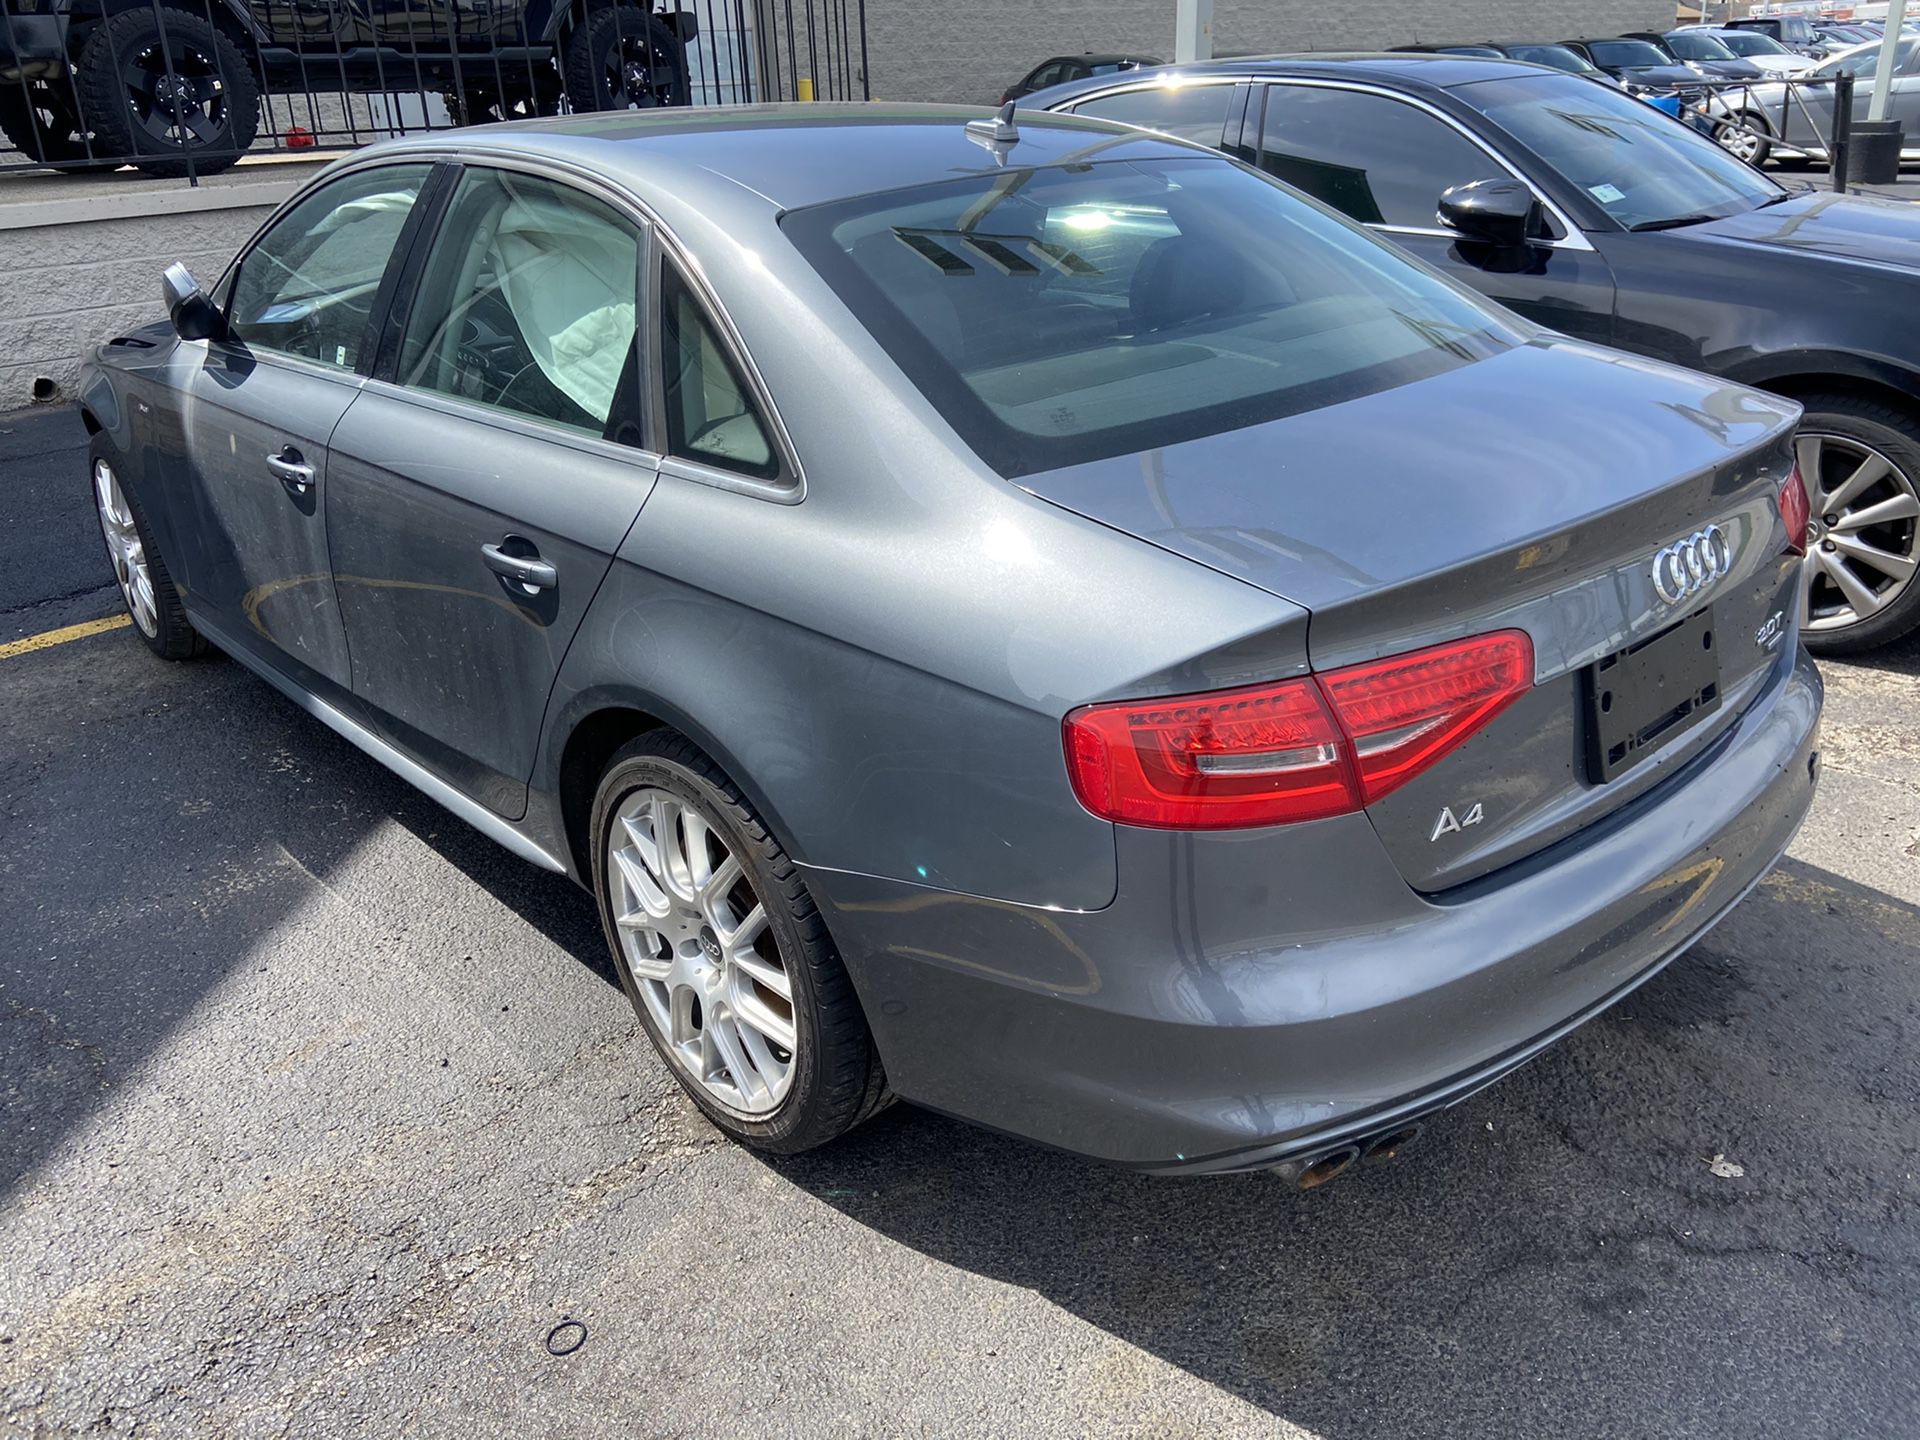 For parts 2014 Audi A4 S-Line Parts out 2.0 Turbo